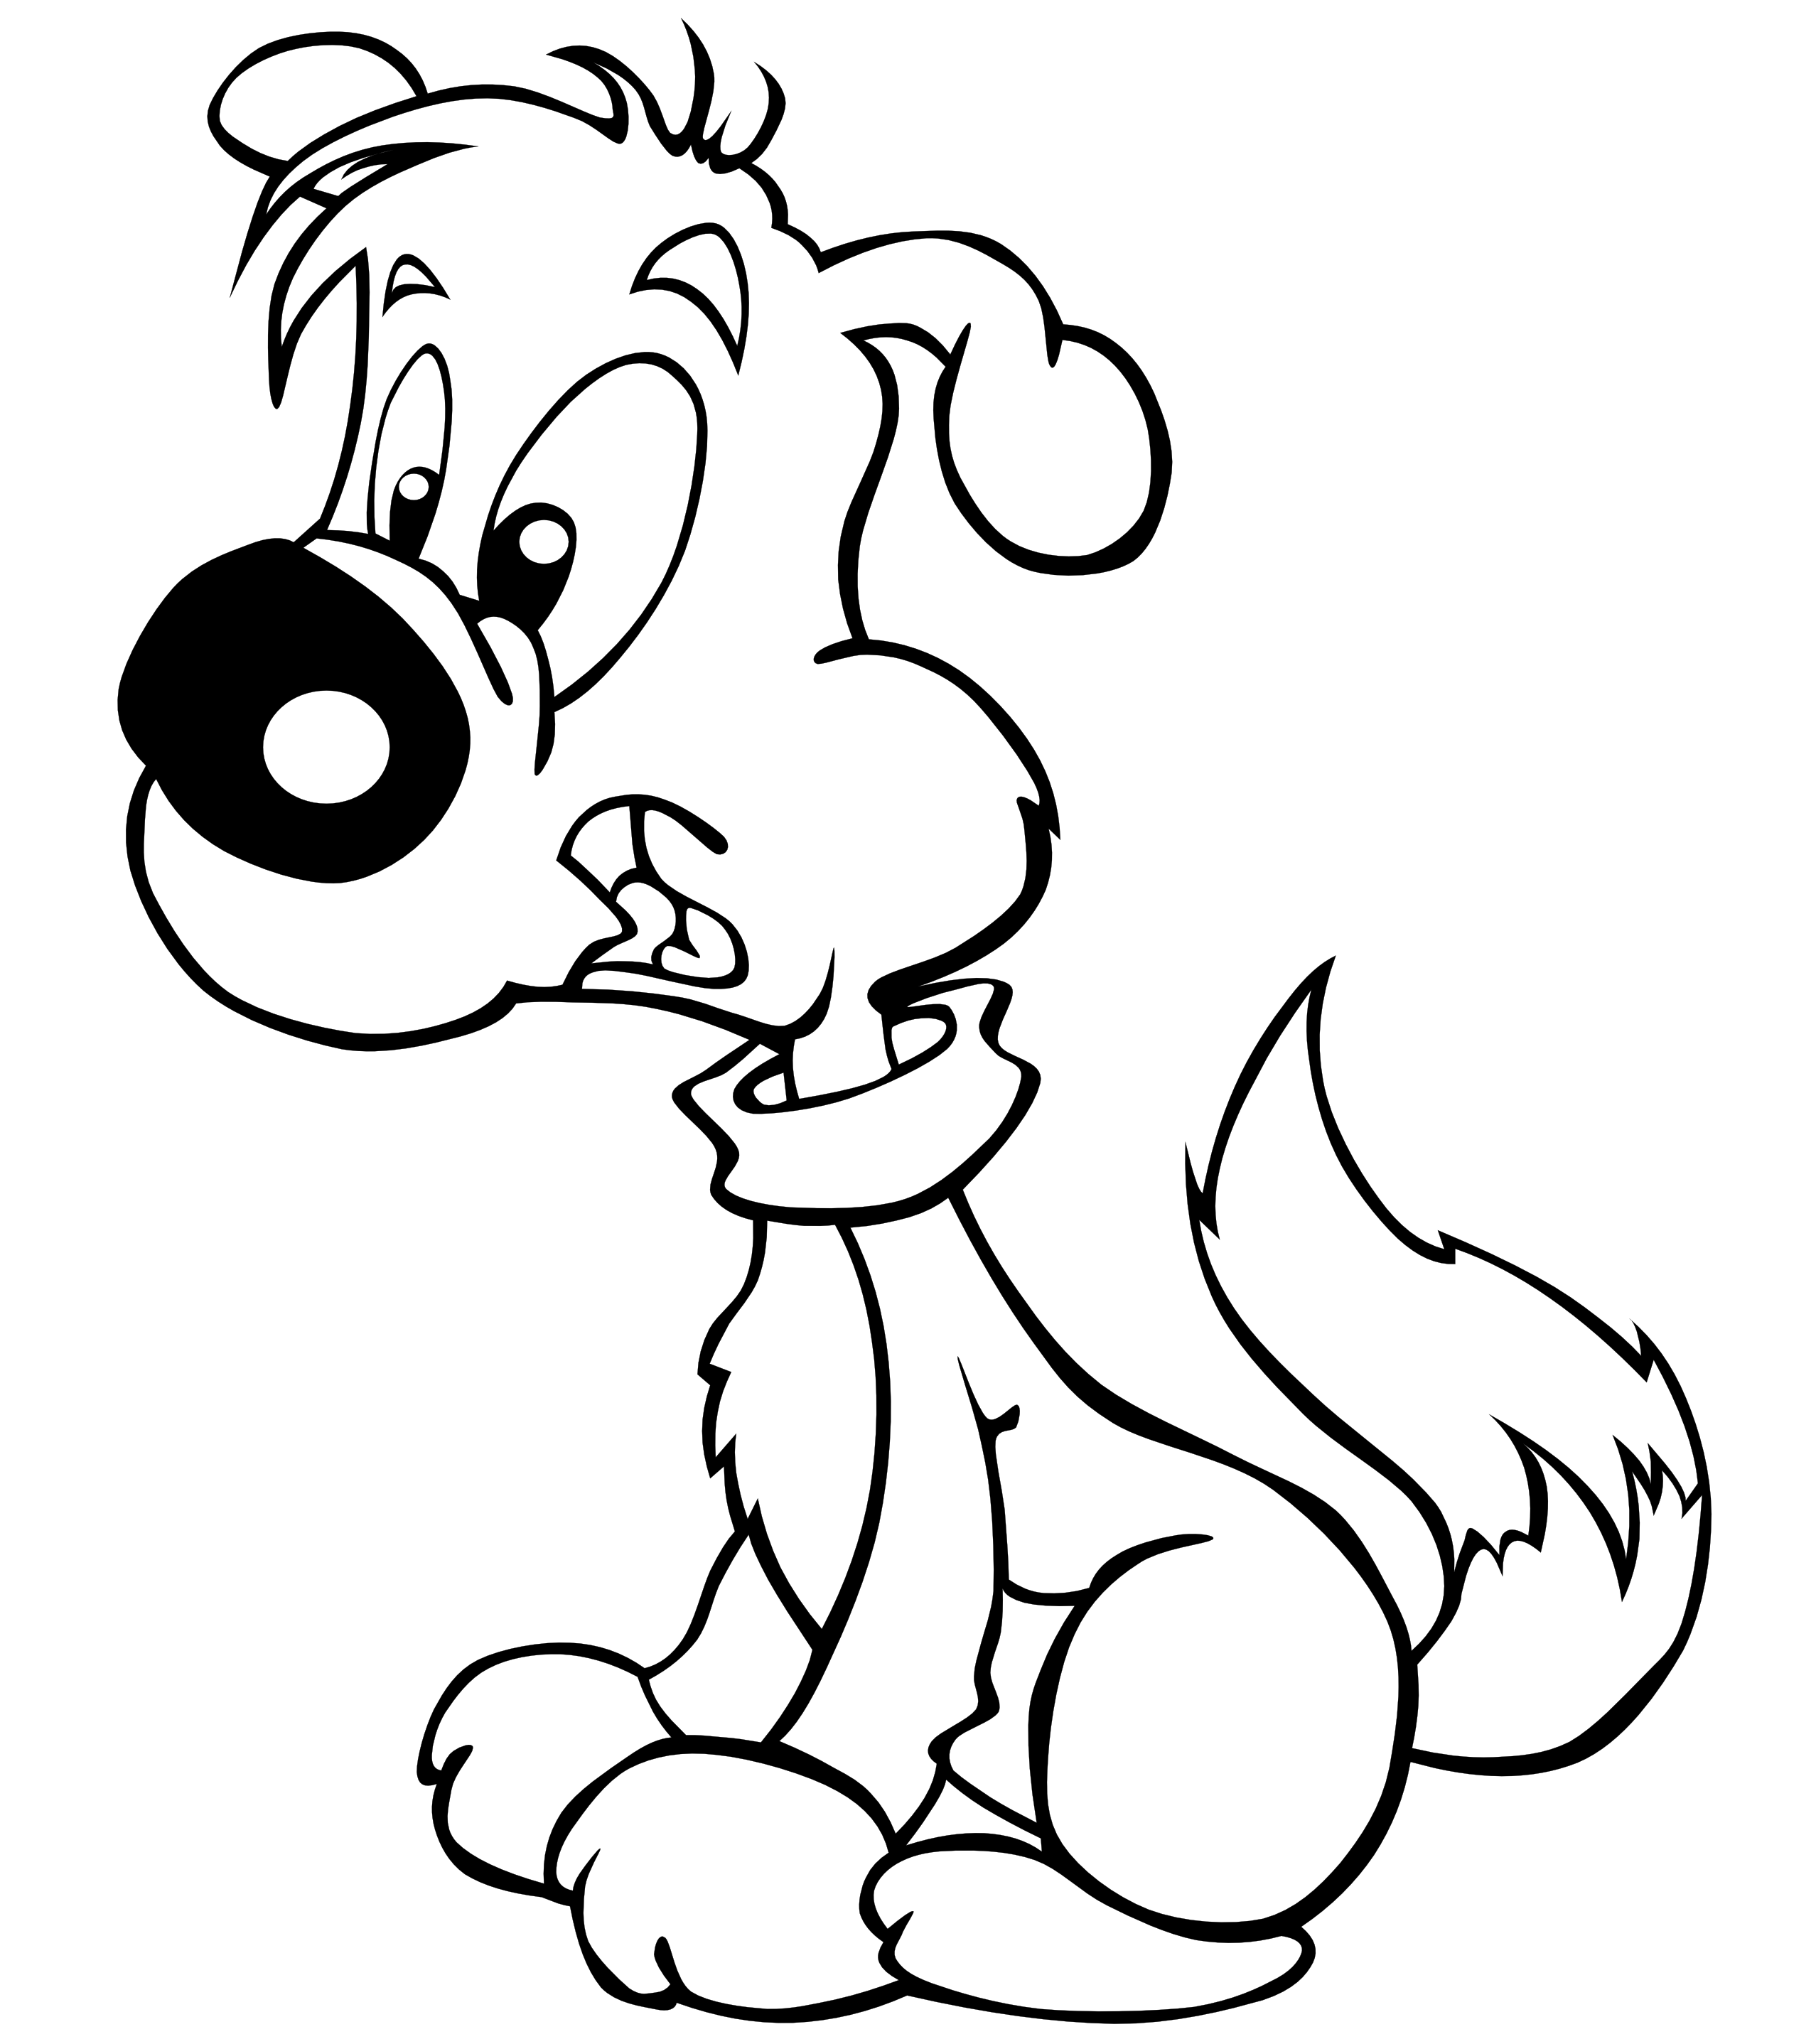 Black And White Cartoon Drawings | Free Download Clip Art | Free ... -  ClipArt Best - ClipArt Best